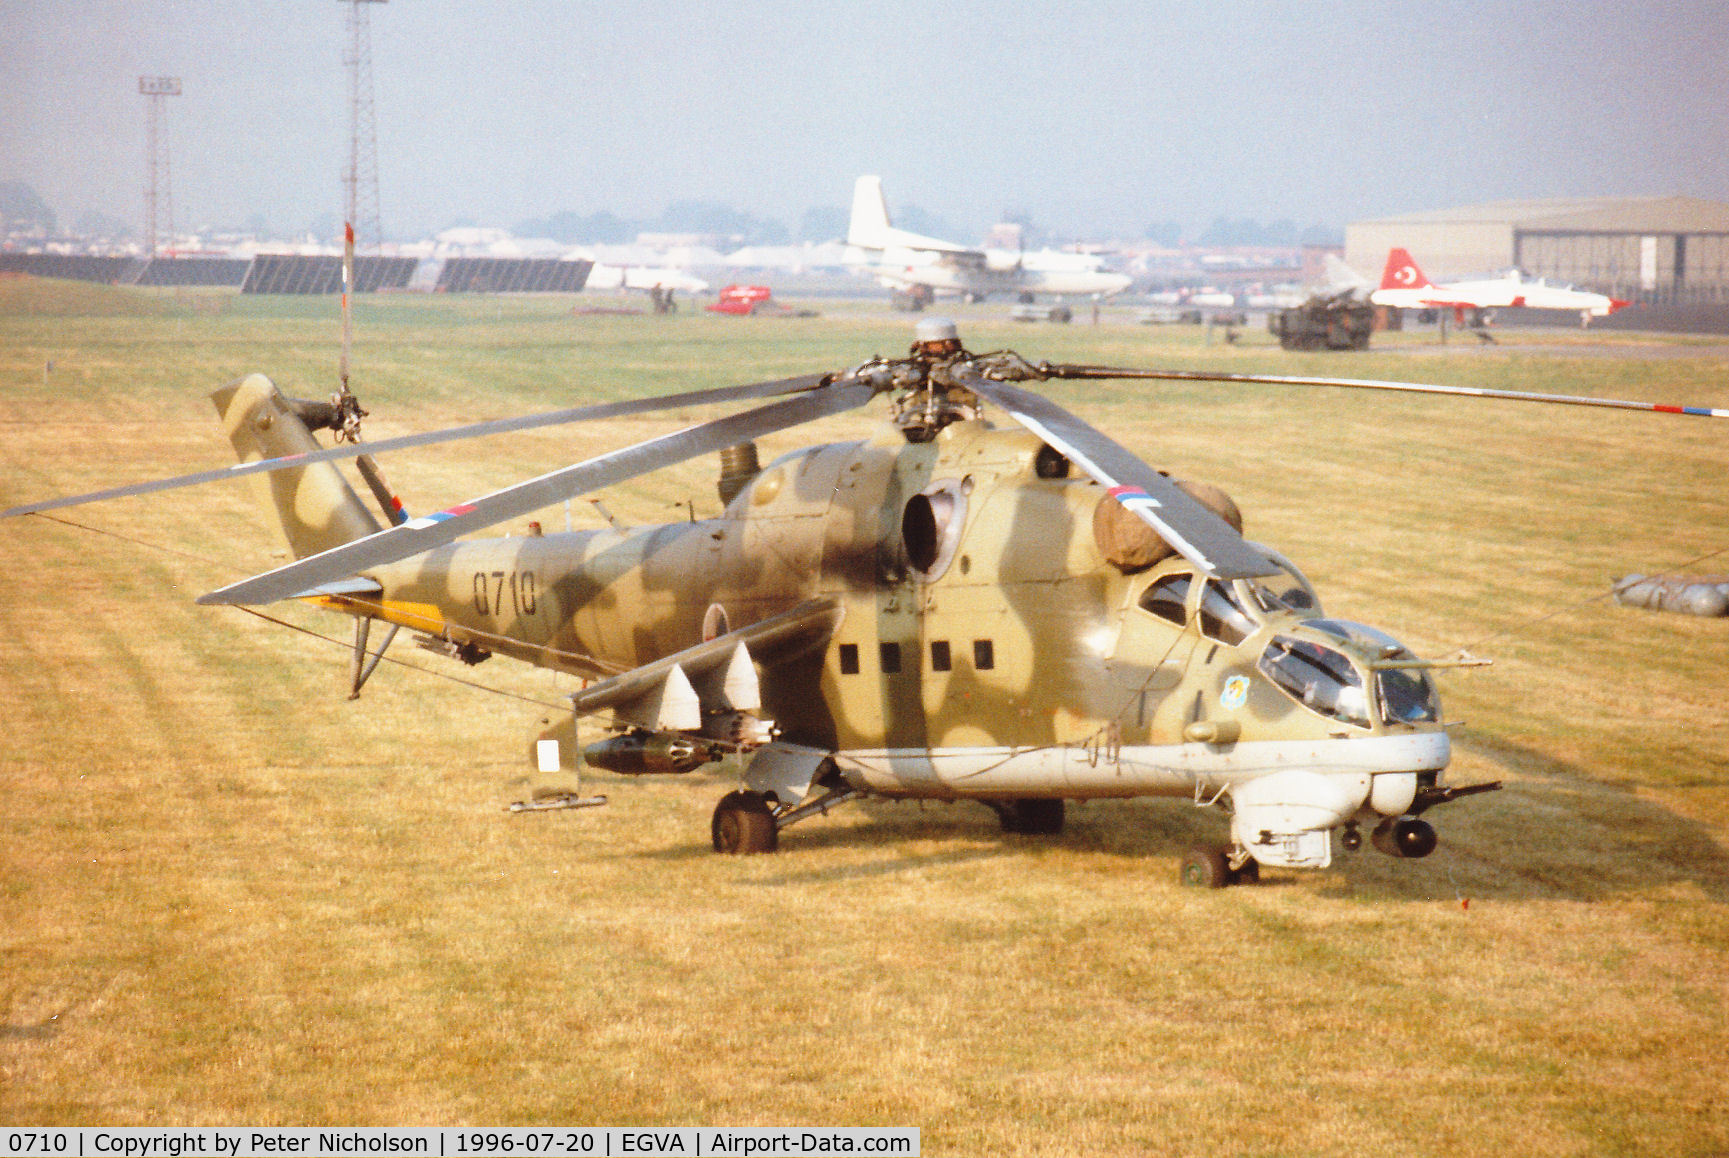 0710, Mil Mi-24V Hind E C/N 730710, Hind E helicopter gunship of 331 Squadron Czech Air Force at the 1996 Royal Intnl Air Tattoo at RAF Fairford.